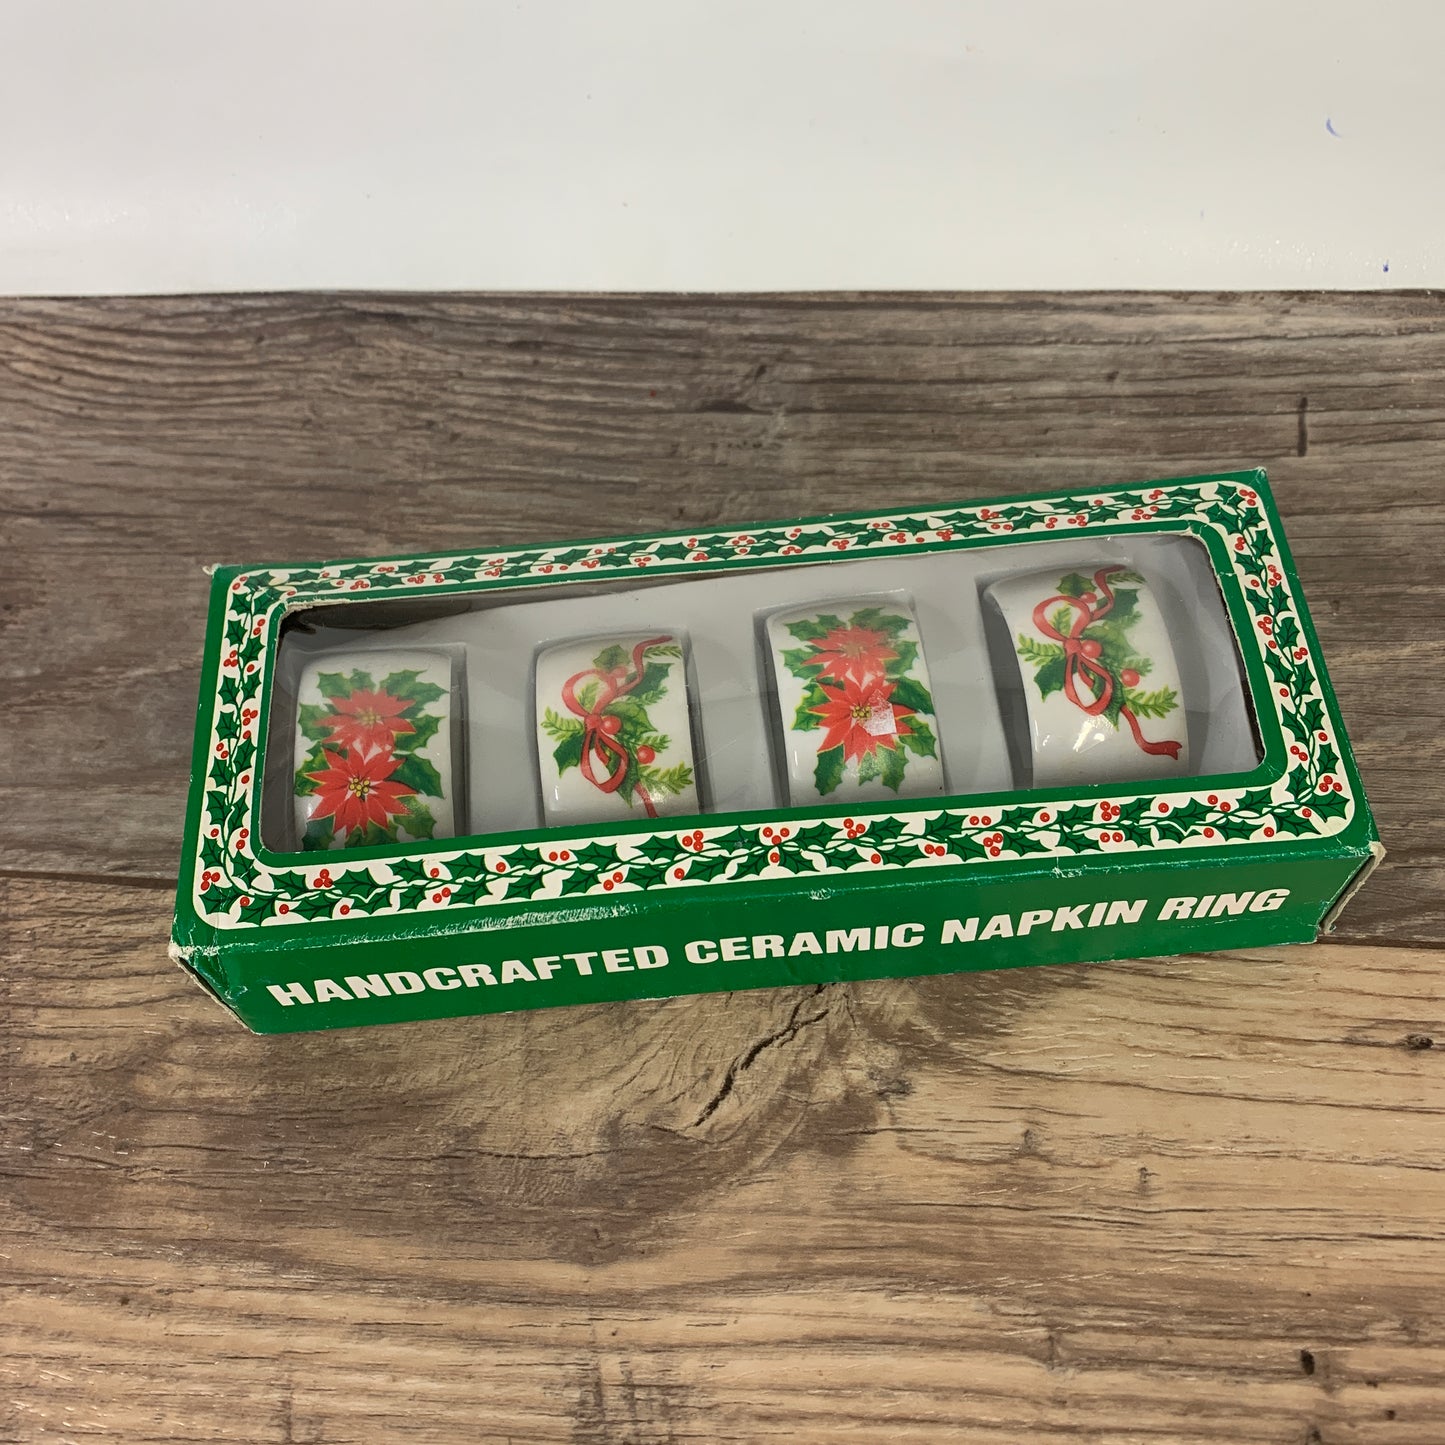 Set of 4 Christmas Napkin Rings, Ceramic Napkin Rings with Red and Green Holiday Napkin Holders